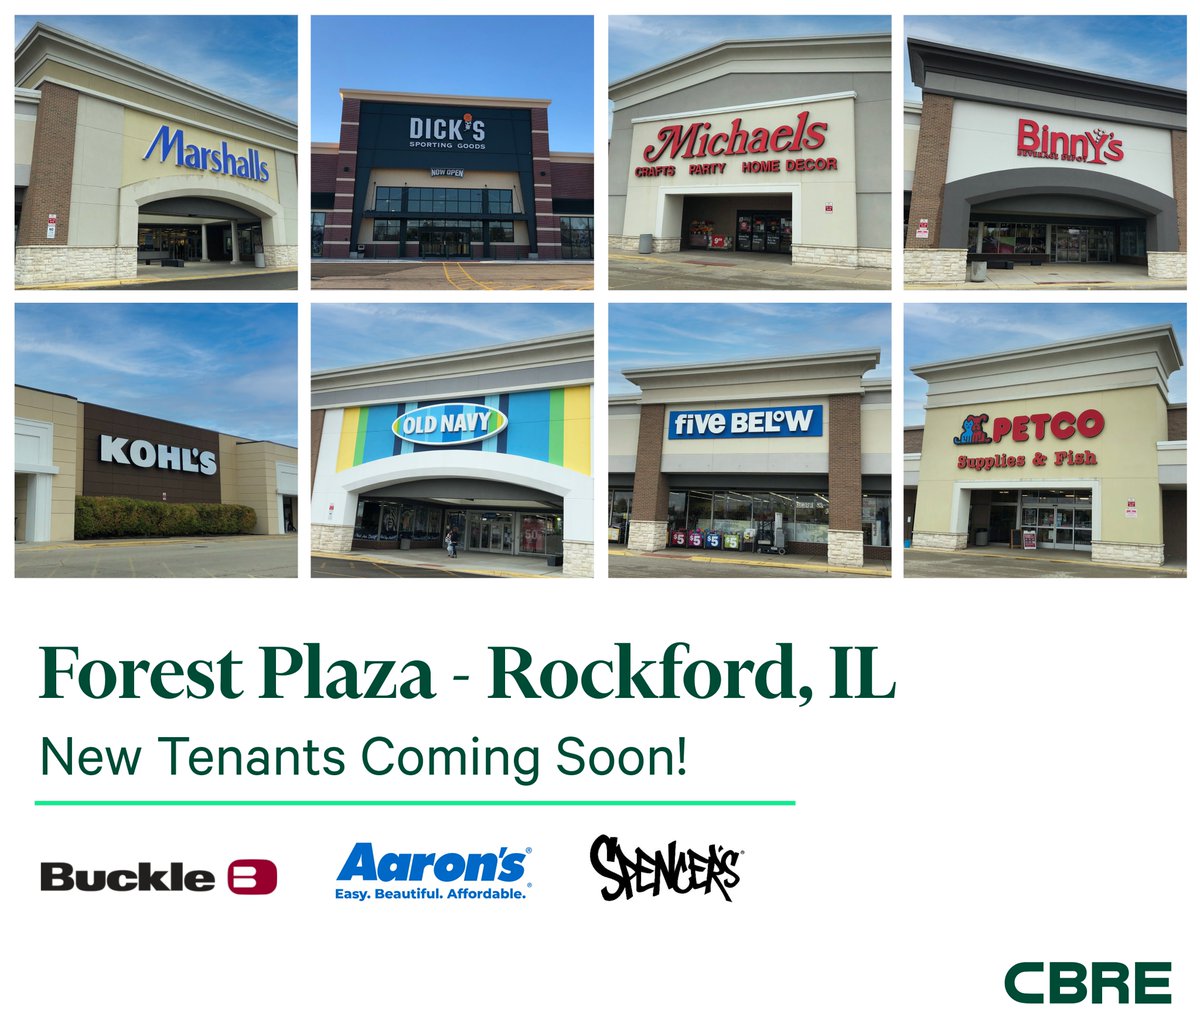 Buckle, Aarons and Spencer's will all be opening soon at Forest Plaza.  Contact us to discuss joining them at Rockford's #1 busiest shopping center.  More info at retailproperties.cbre.us/property/outpu…
#CBRE #CBREretail #retailrealestate #retailleasing  #shoppingcenters #commercialrealestate